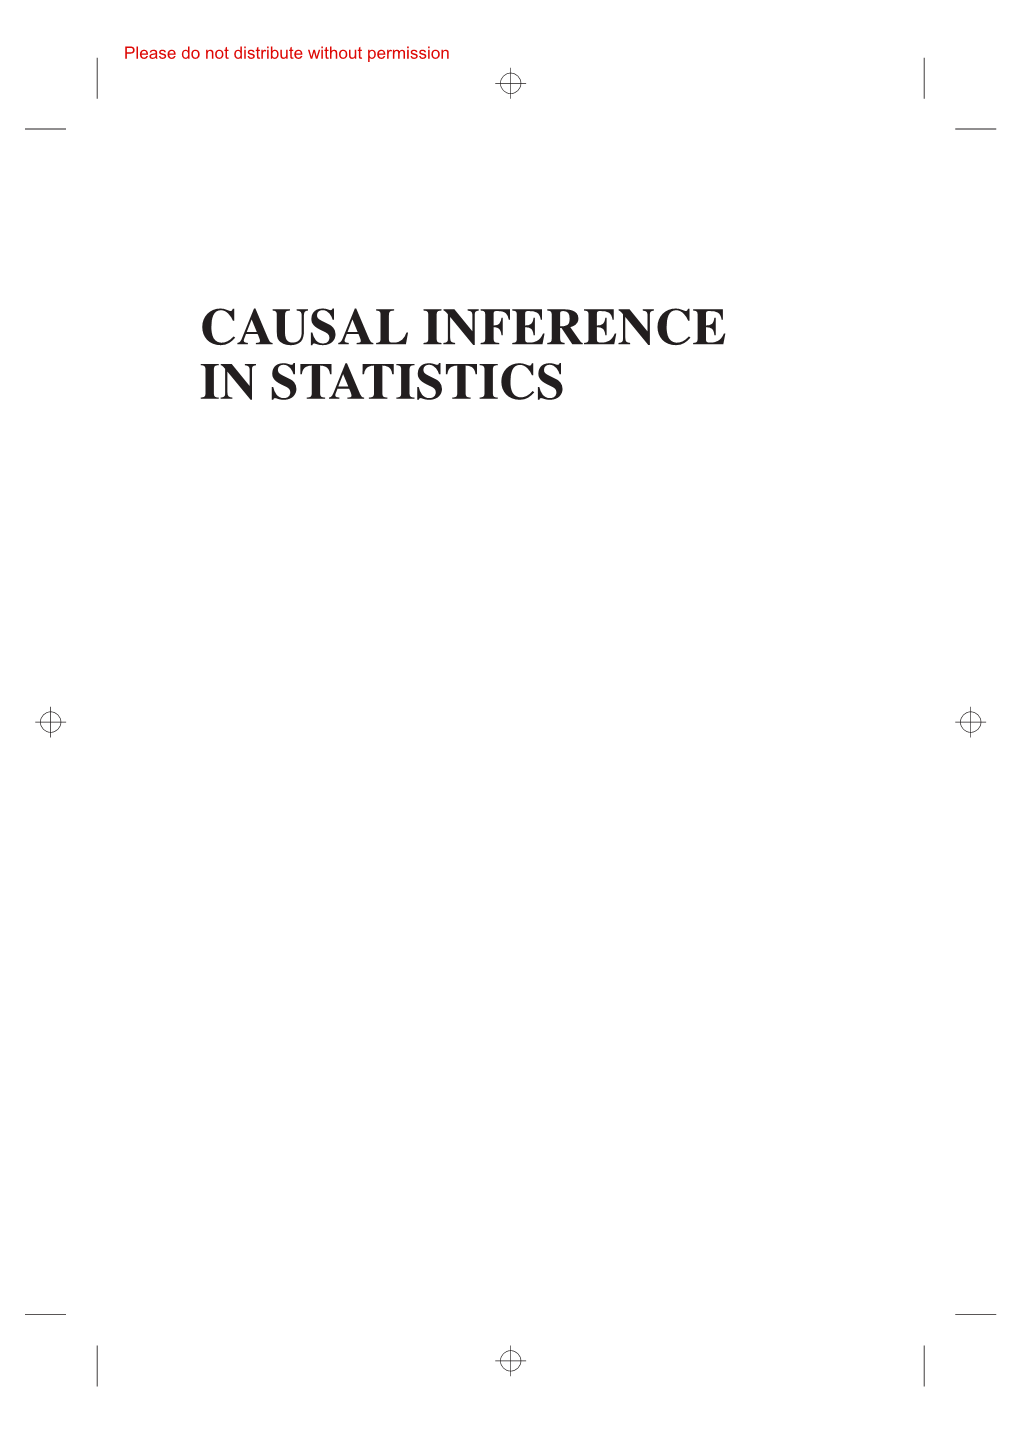 CAUSAL INFERENCE in STATISTICS.Pdf